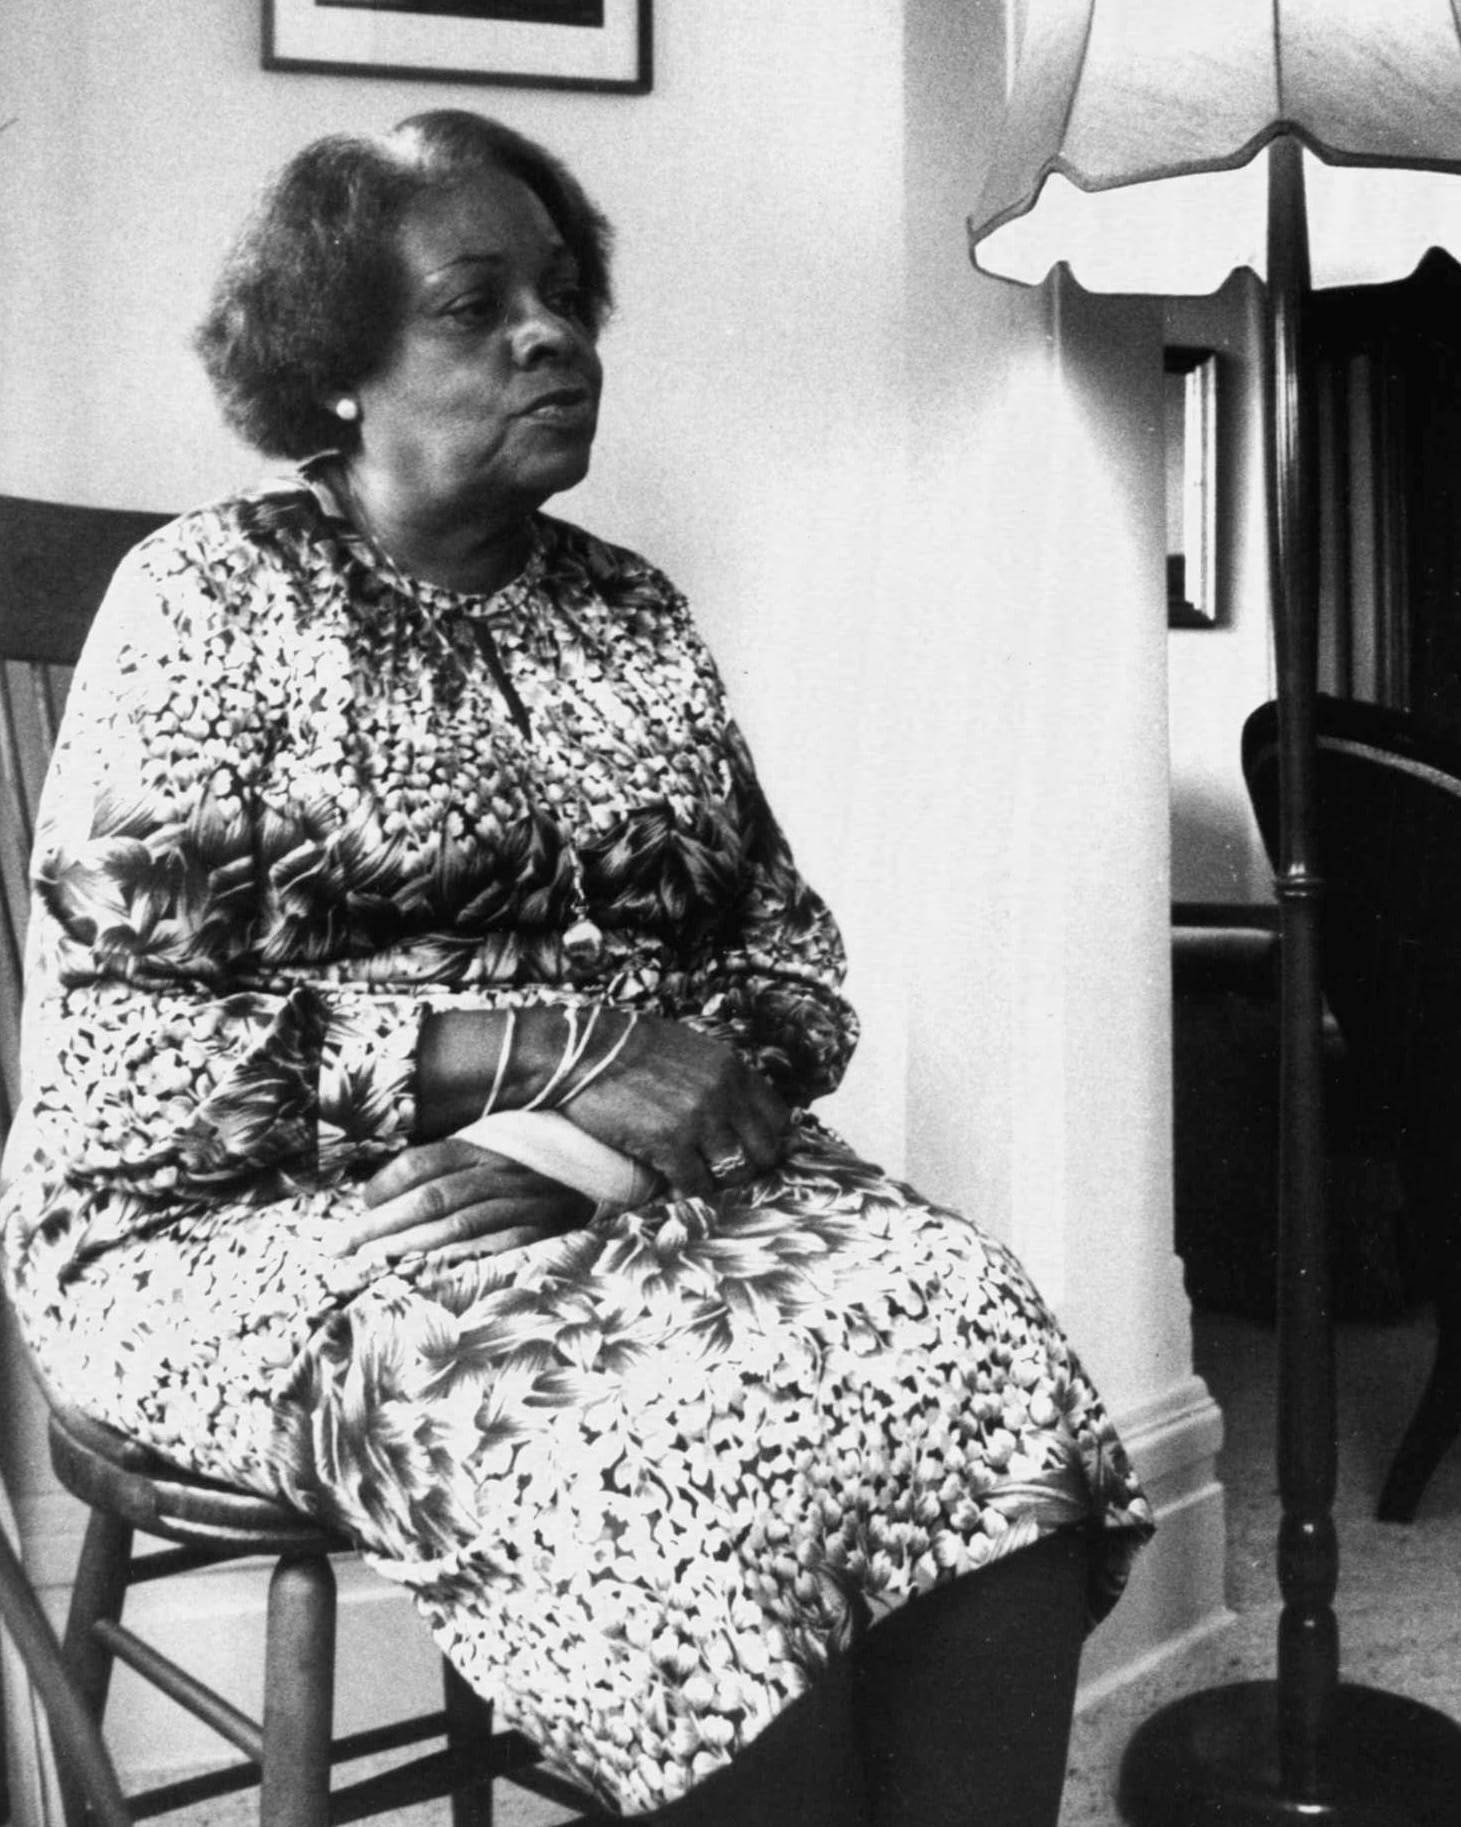 A black and white photo of Nita Barrow sitting in a chair and wearing a patterned dress.